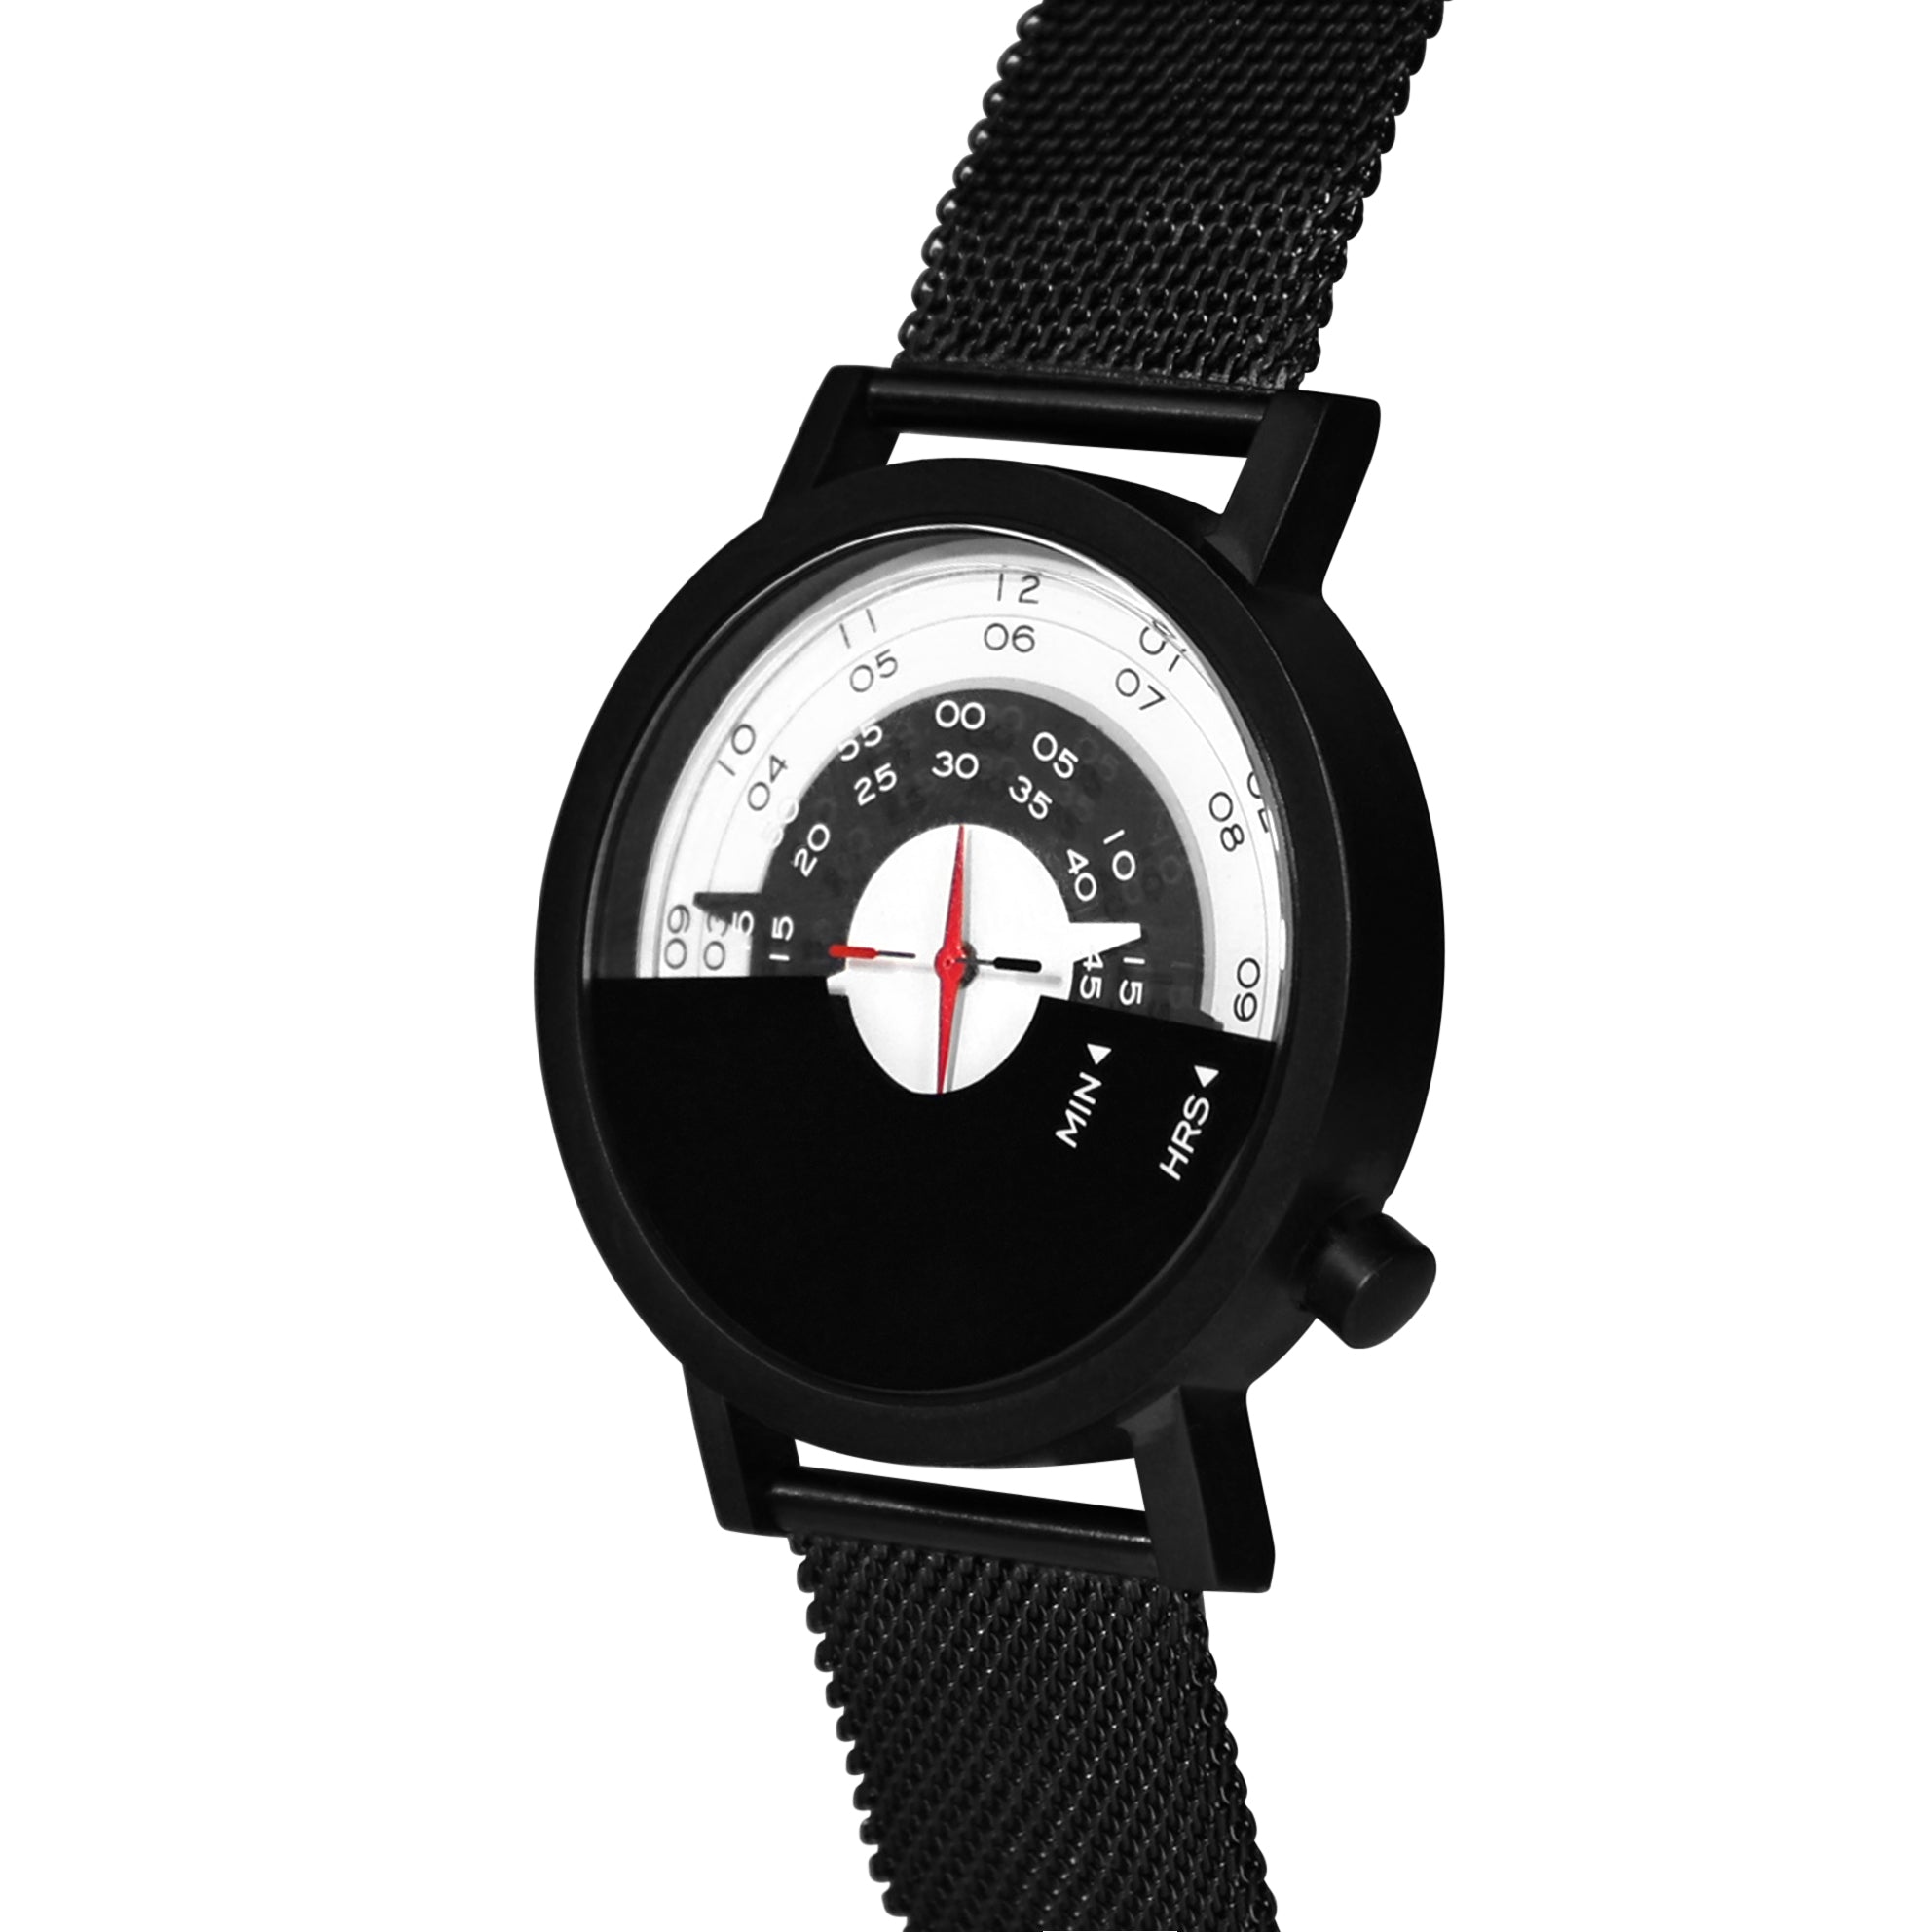 Beyond the Horizon Black Mesh - Projects Watches